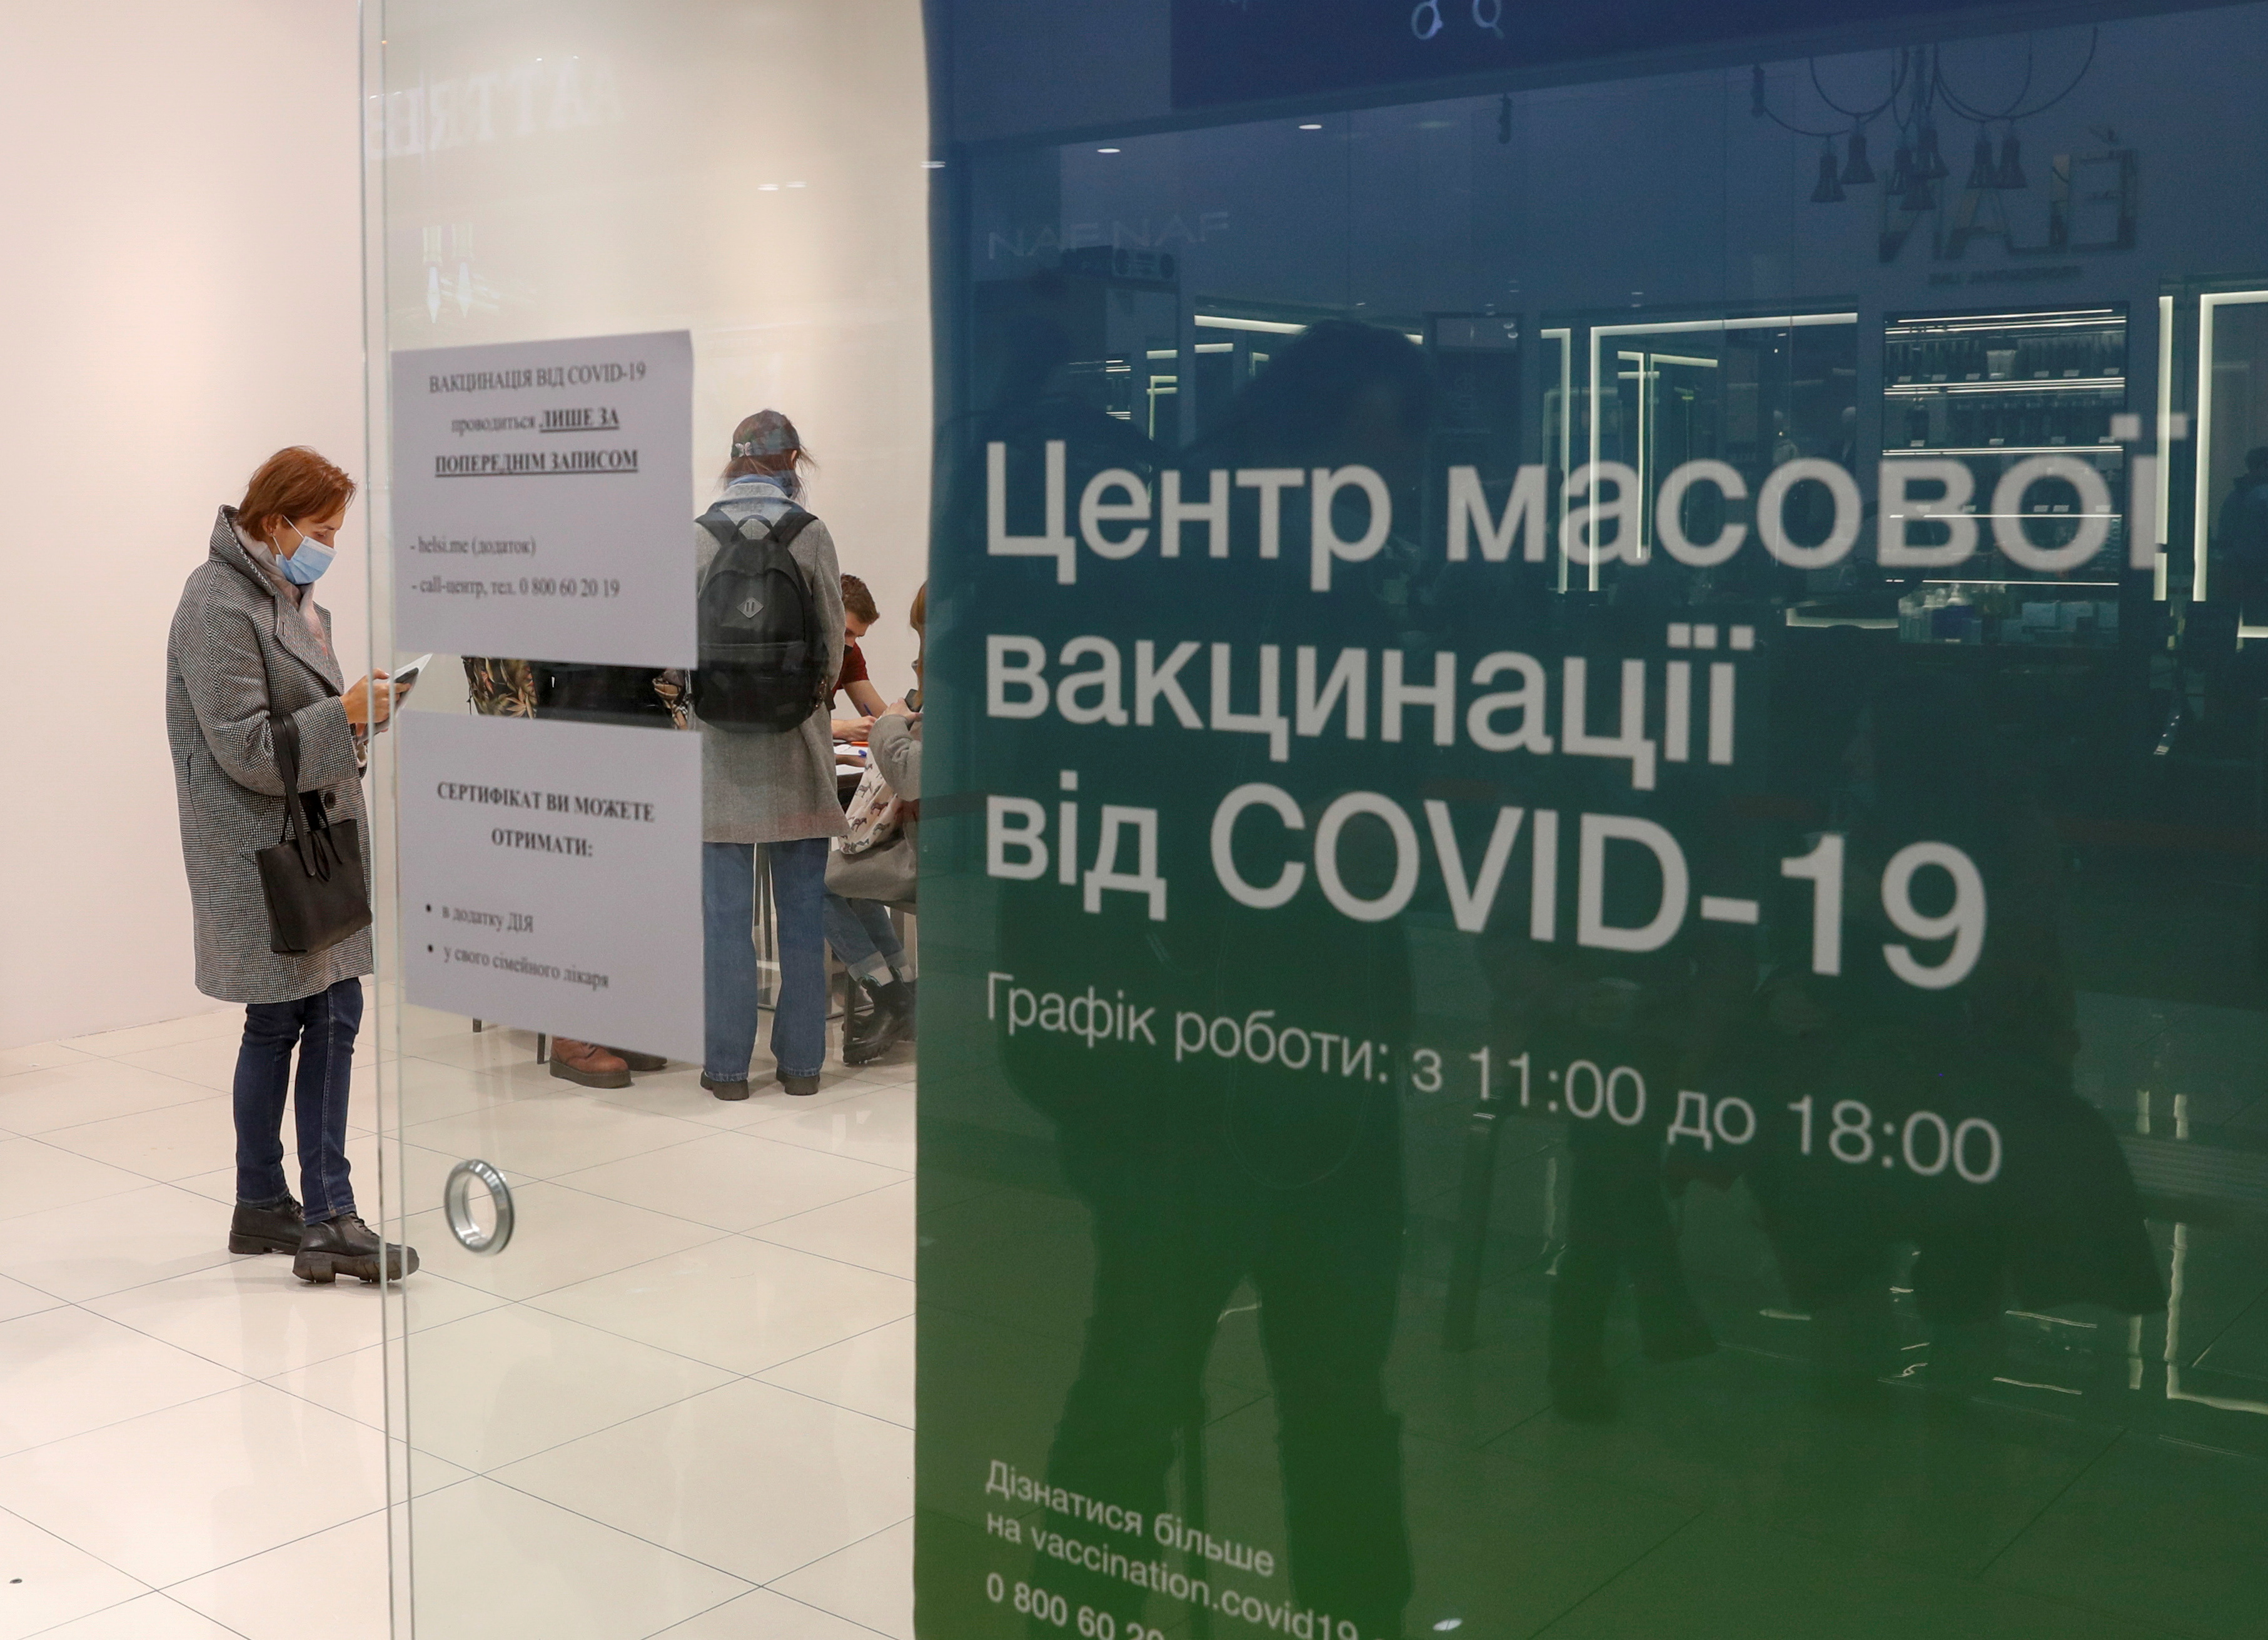 People wait to receive an injection of vaccine against the coronavirus disease (COVID-19) at a vaccination centre in a shopping mall in Kyiv, Ukraine October 27, 2021. Picture taken October 27, 2021. REUTERS/Valentyn Ogirenko